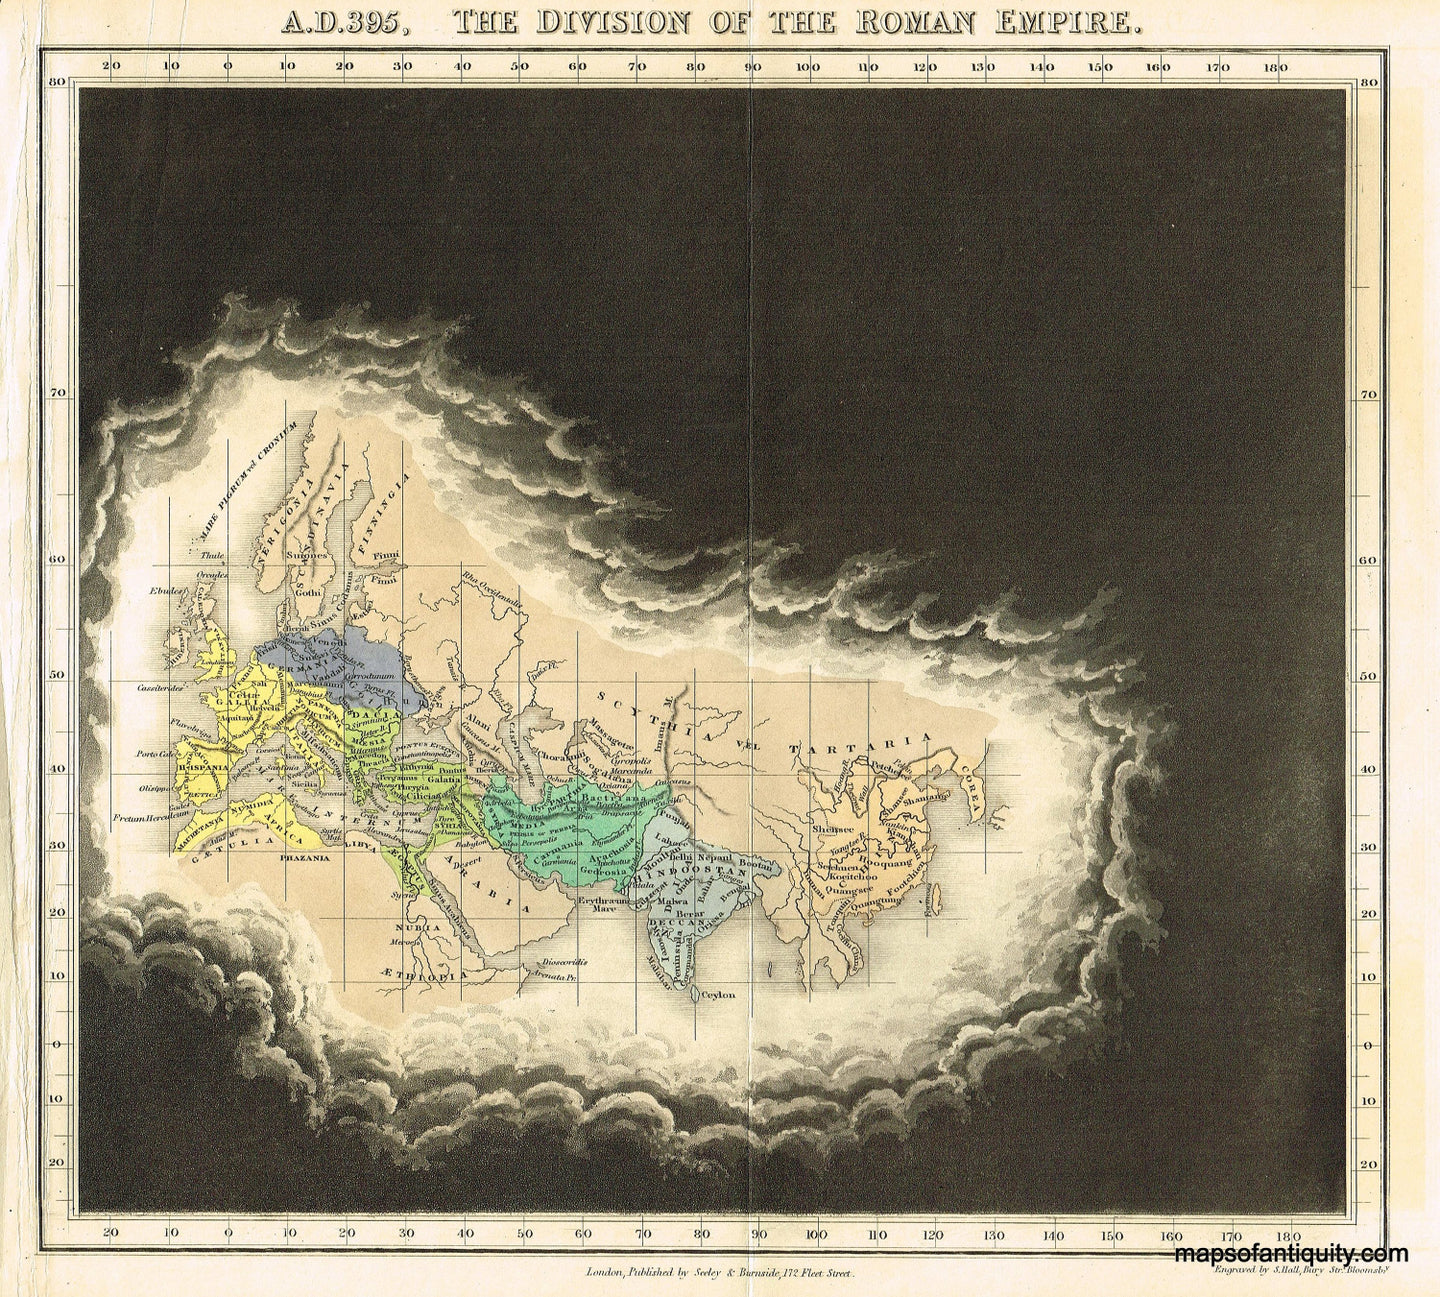 Antique-Hand-Colored-Map-A.D.-395.-The-Division-of-the-Roman-Empire-World--1830-Quin-Maps-Of-Antiquity